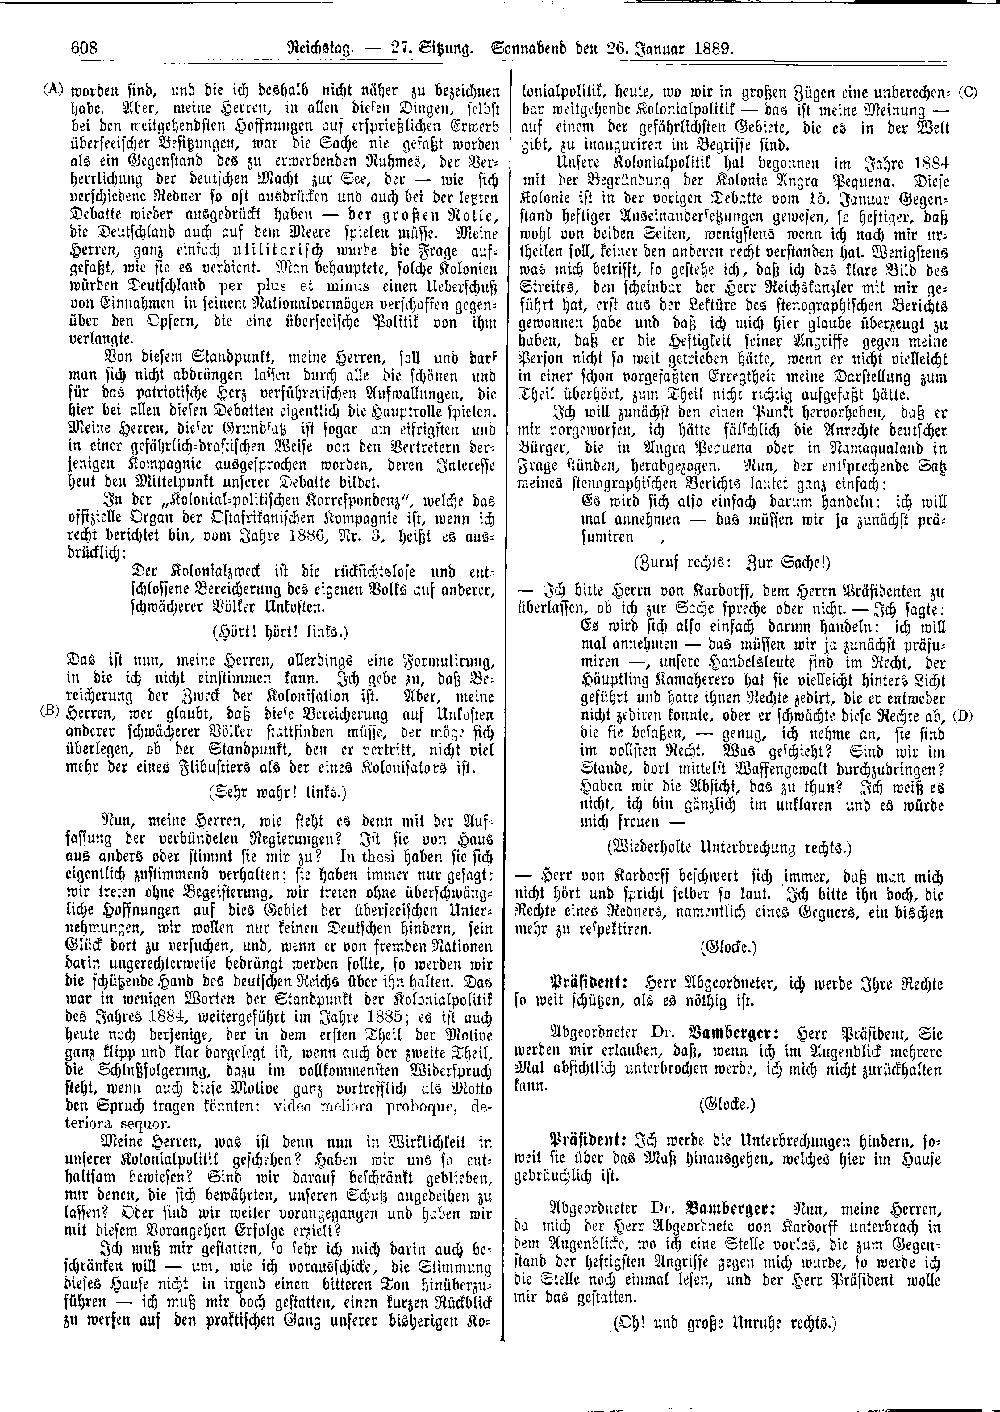 Scan of page 608